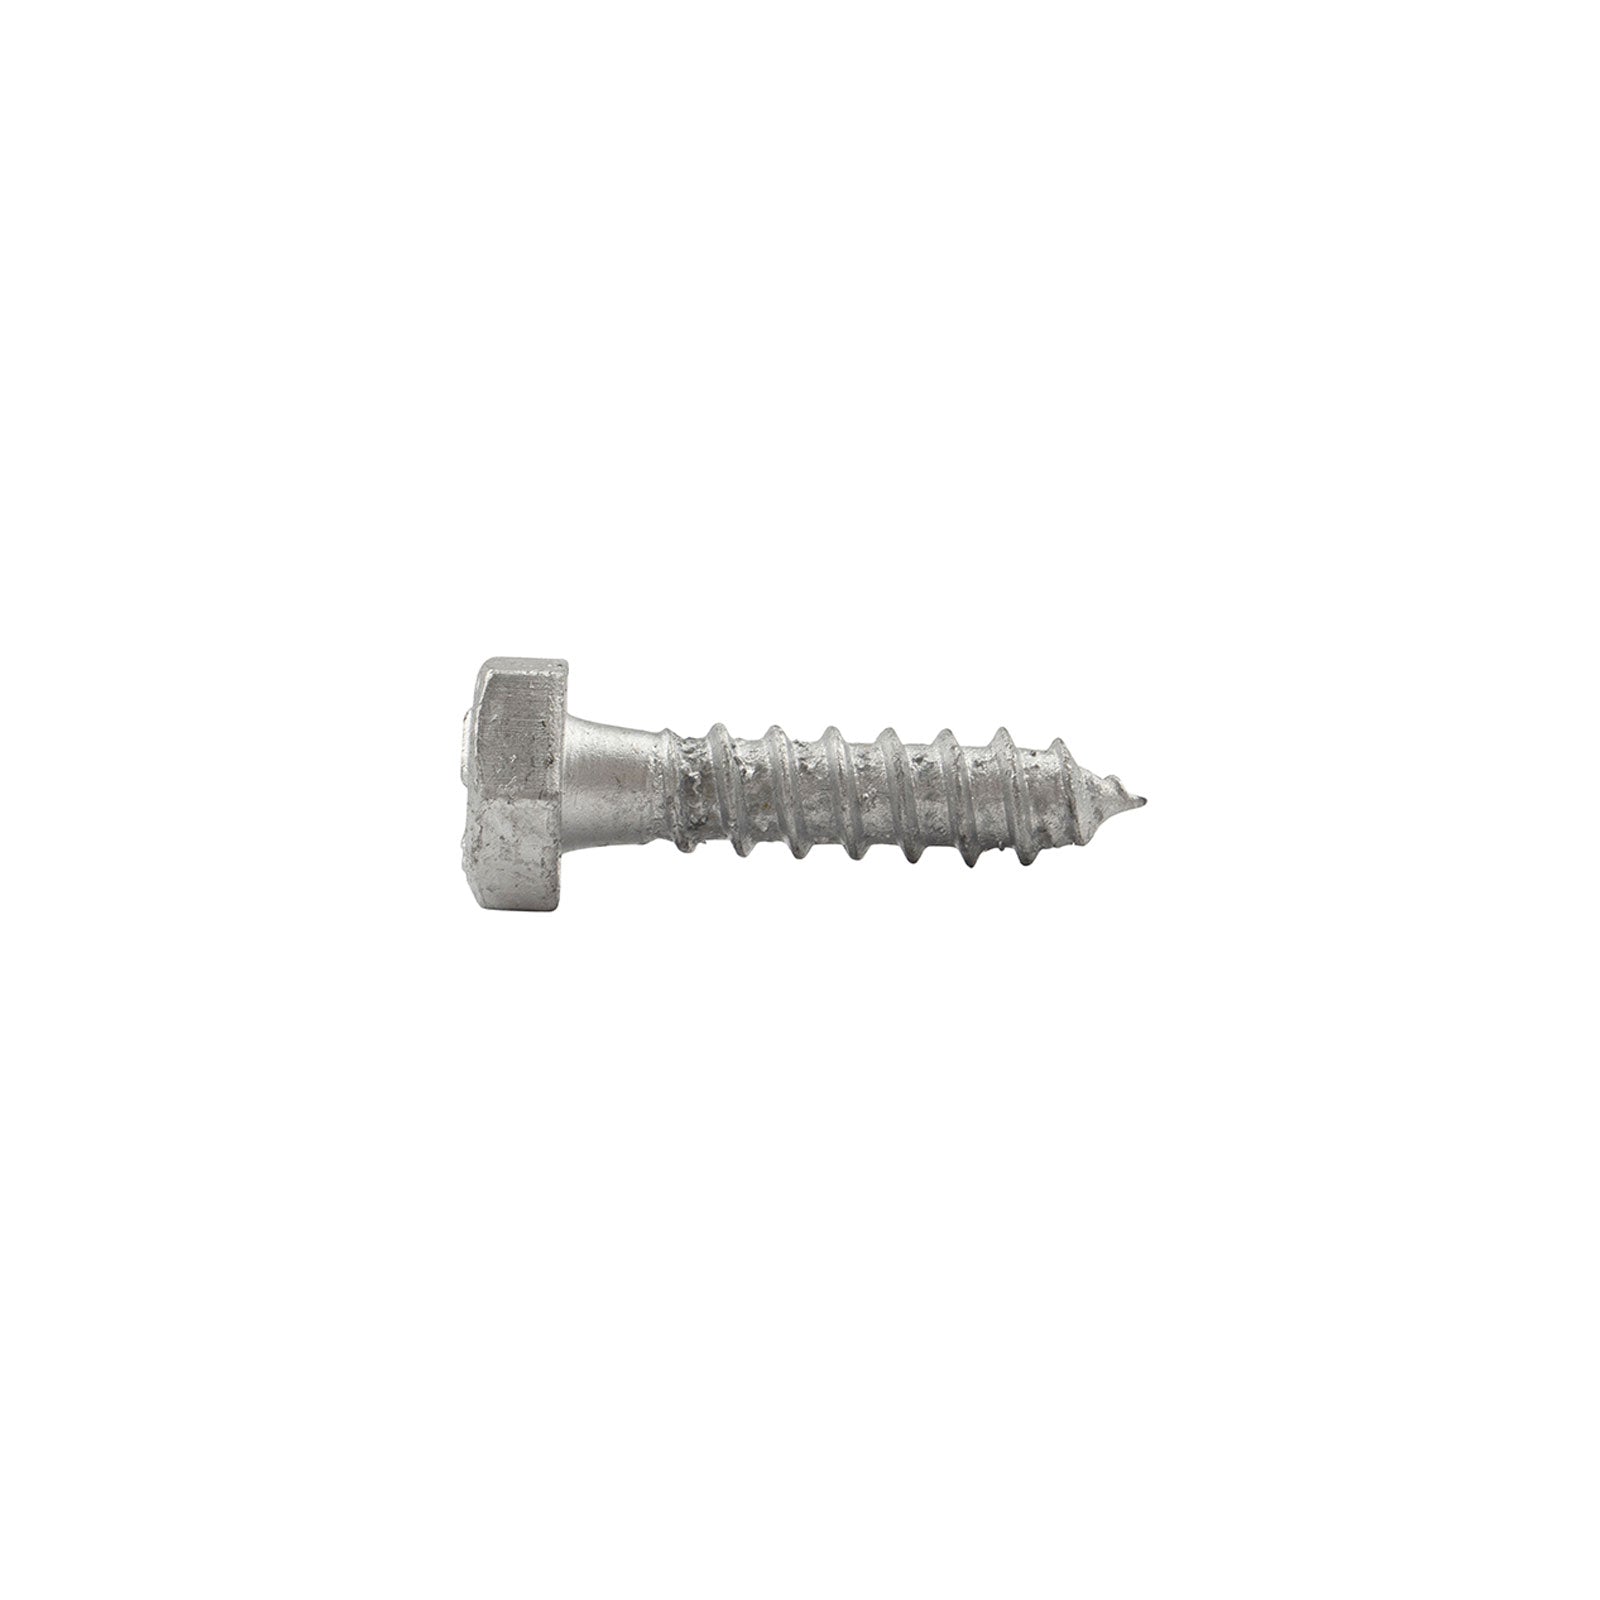 1/4"-10 x 1" Conquest Hex Head Lag Bolt for Wood - Hot Dip Galvanized